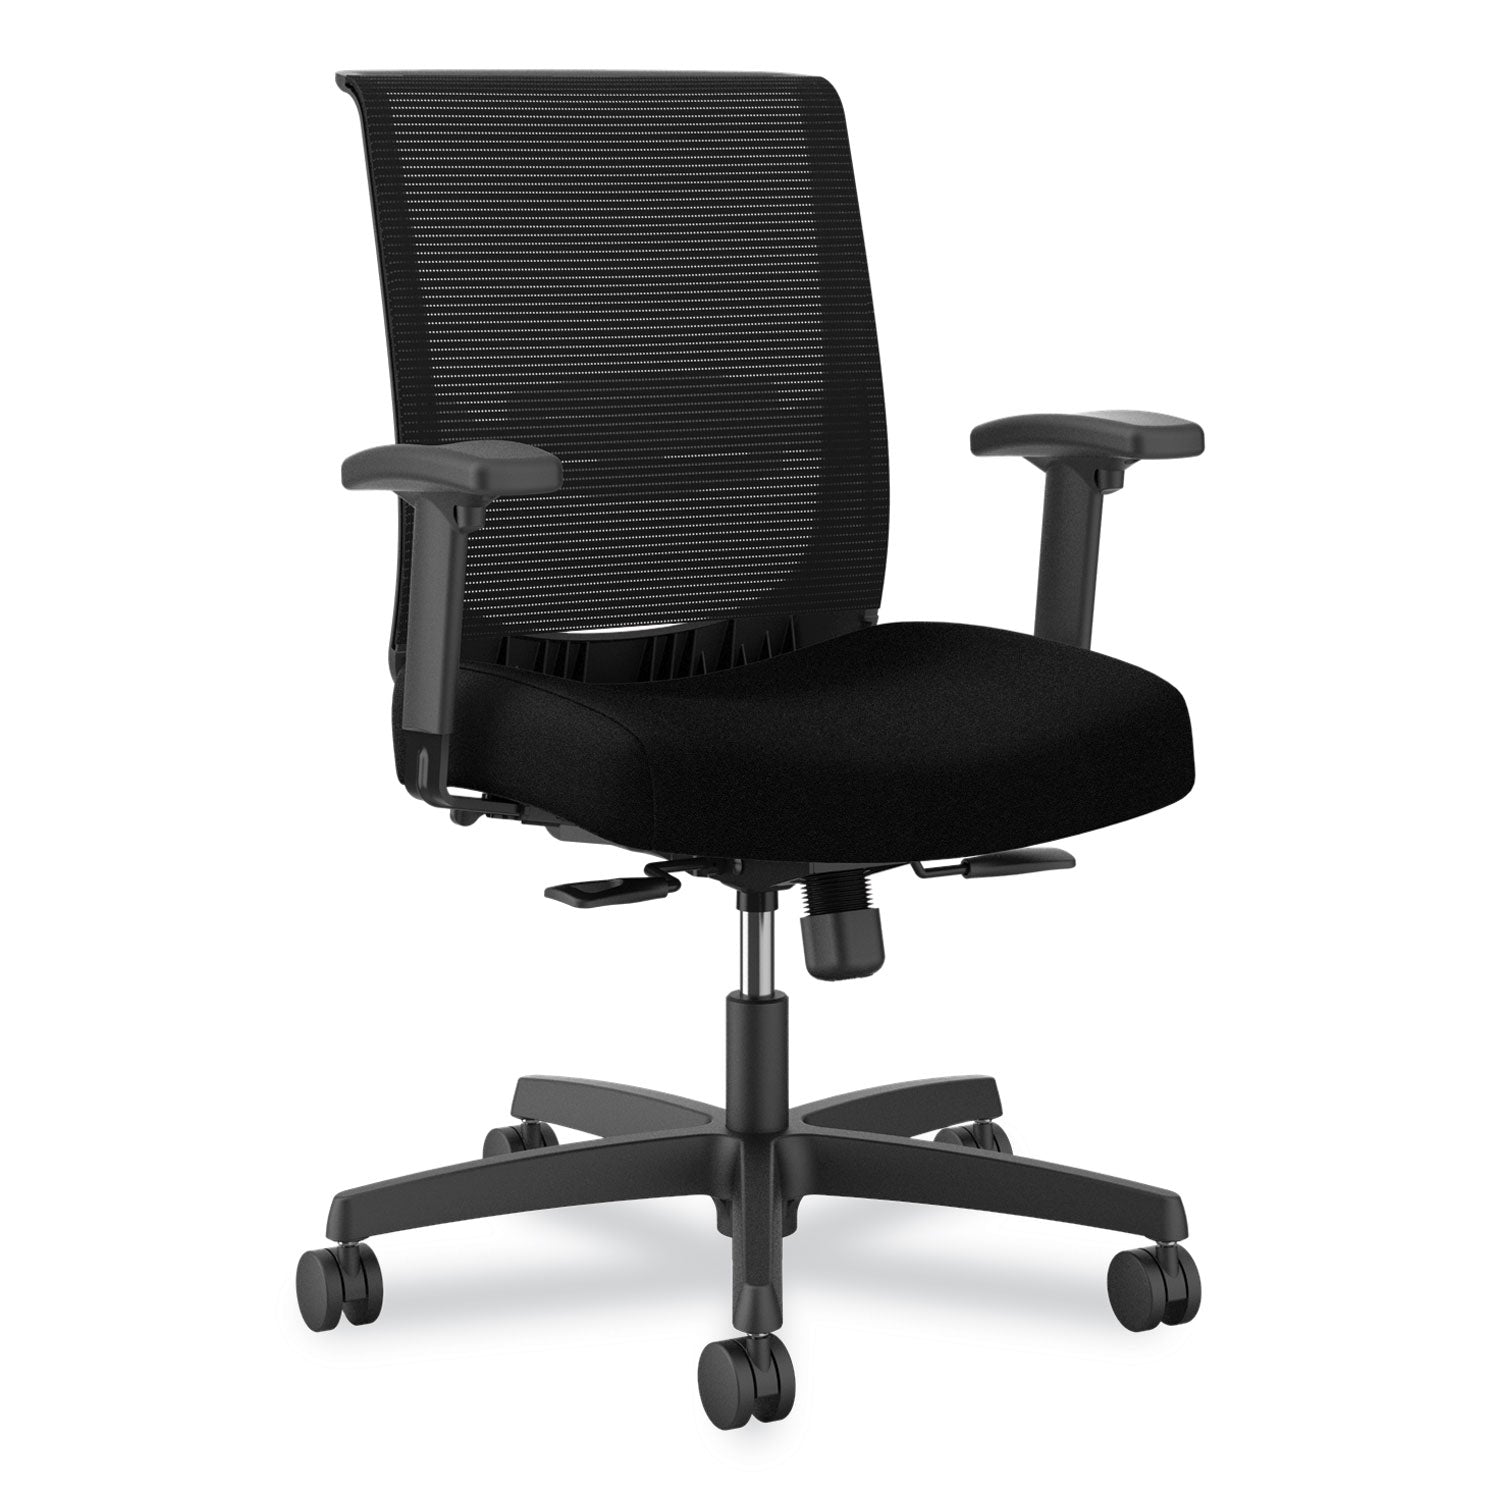 convergence-mid-back-task-chair-swivel-tilt-up-to-275lb-165-to-21-seat-ht-black-seat-back-frameships-in-7-10-bus-days_honcmy1acu10 - 1